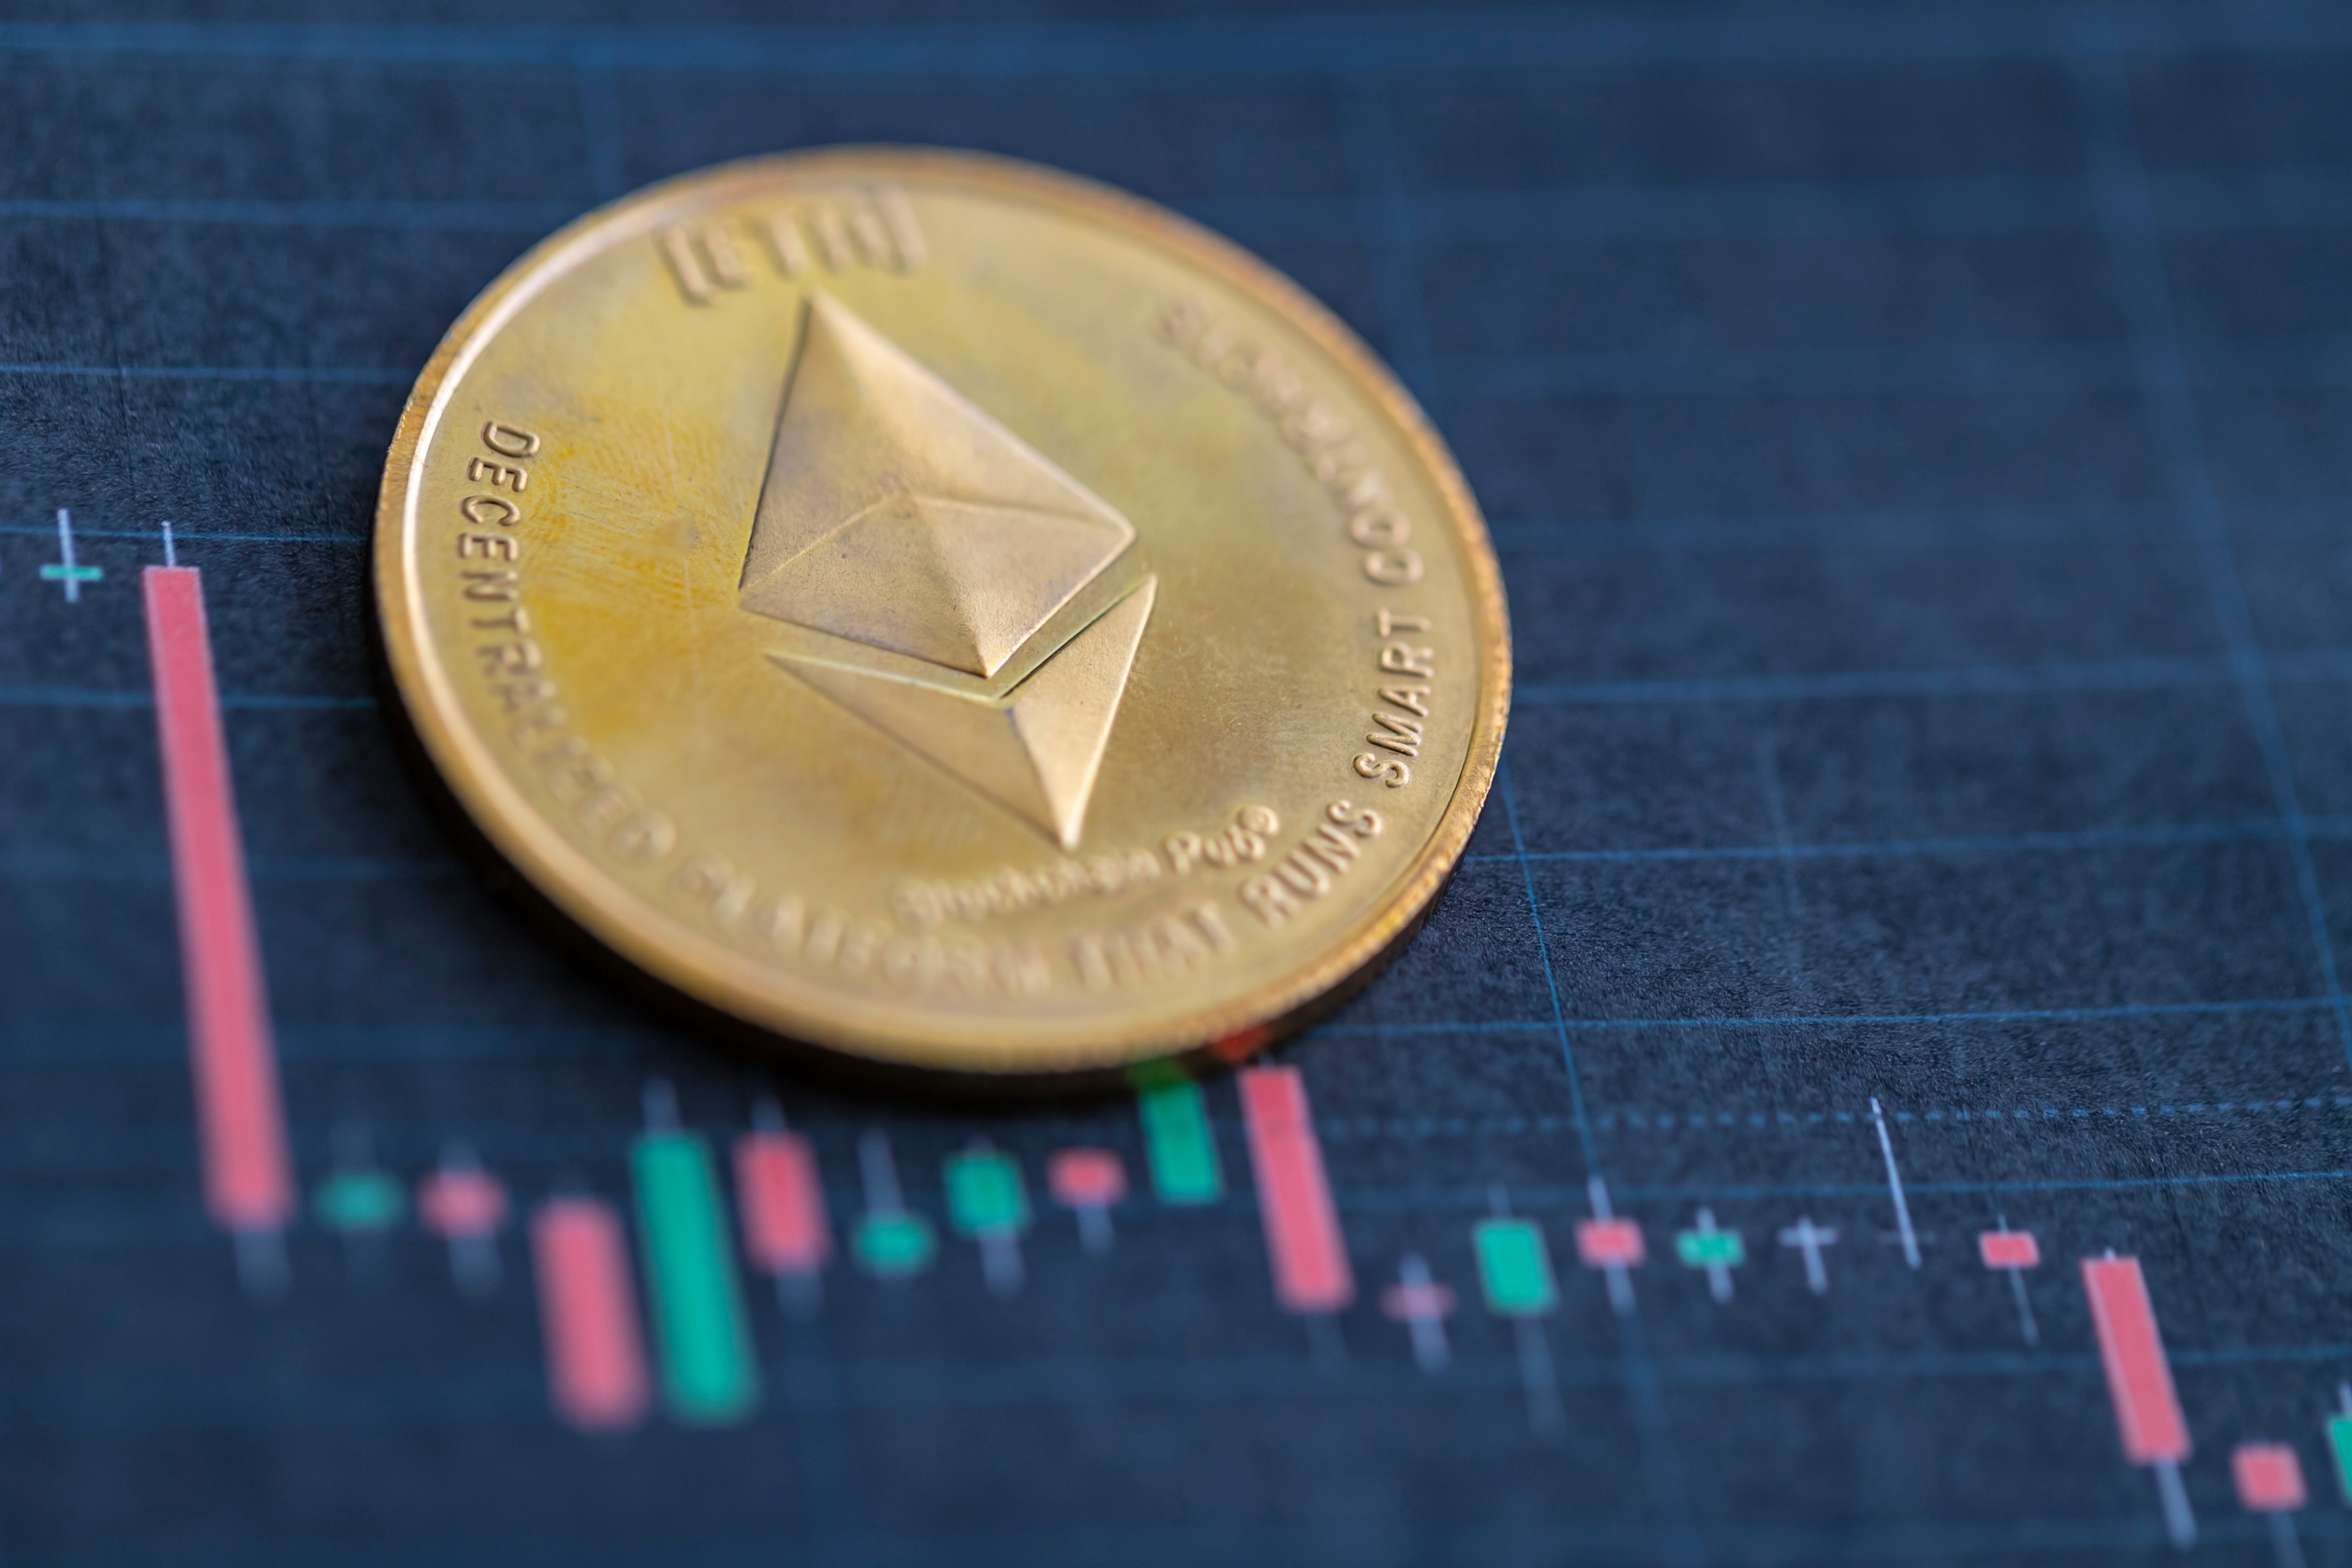 Morgan Stanley's New 'Speculation Indicator' Enables Ethereum (ETH) Price Forecasting